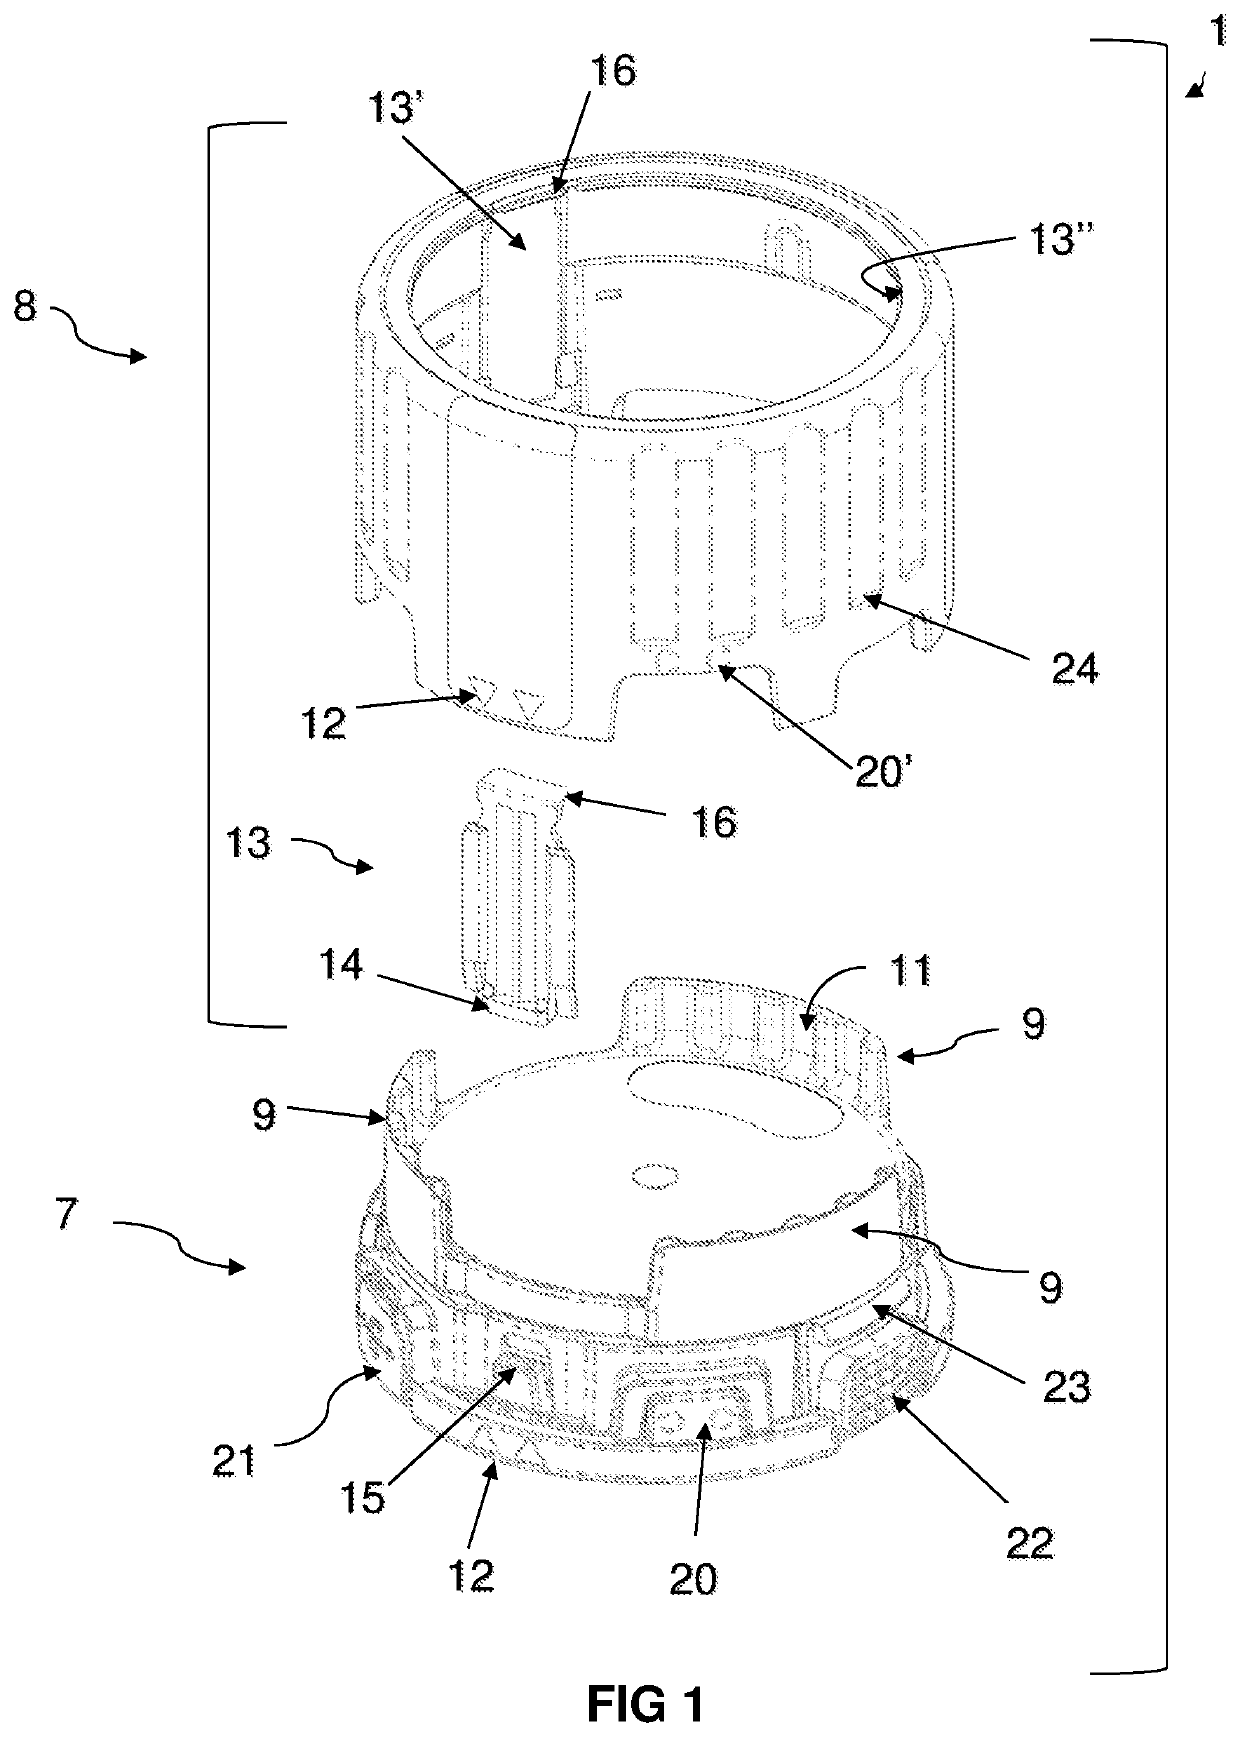 Compliance monitor for a dry powder medicament delivery device